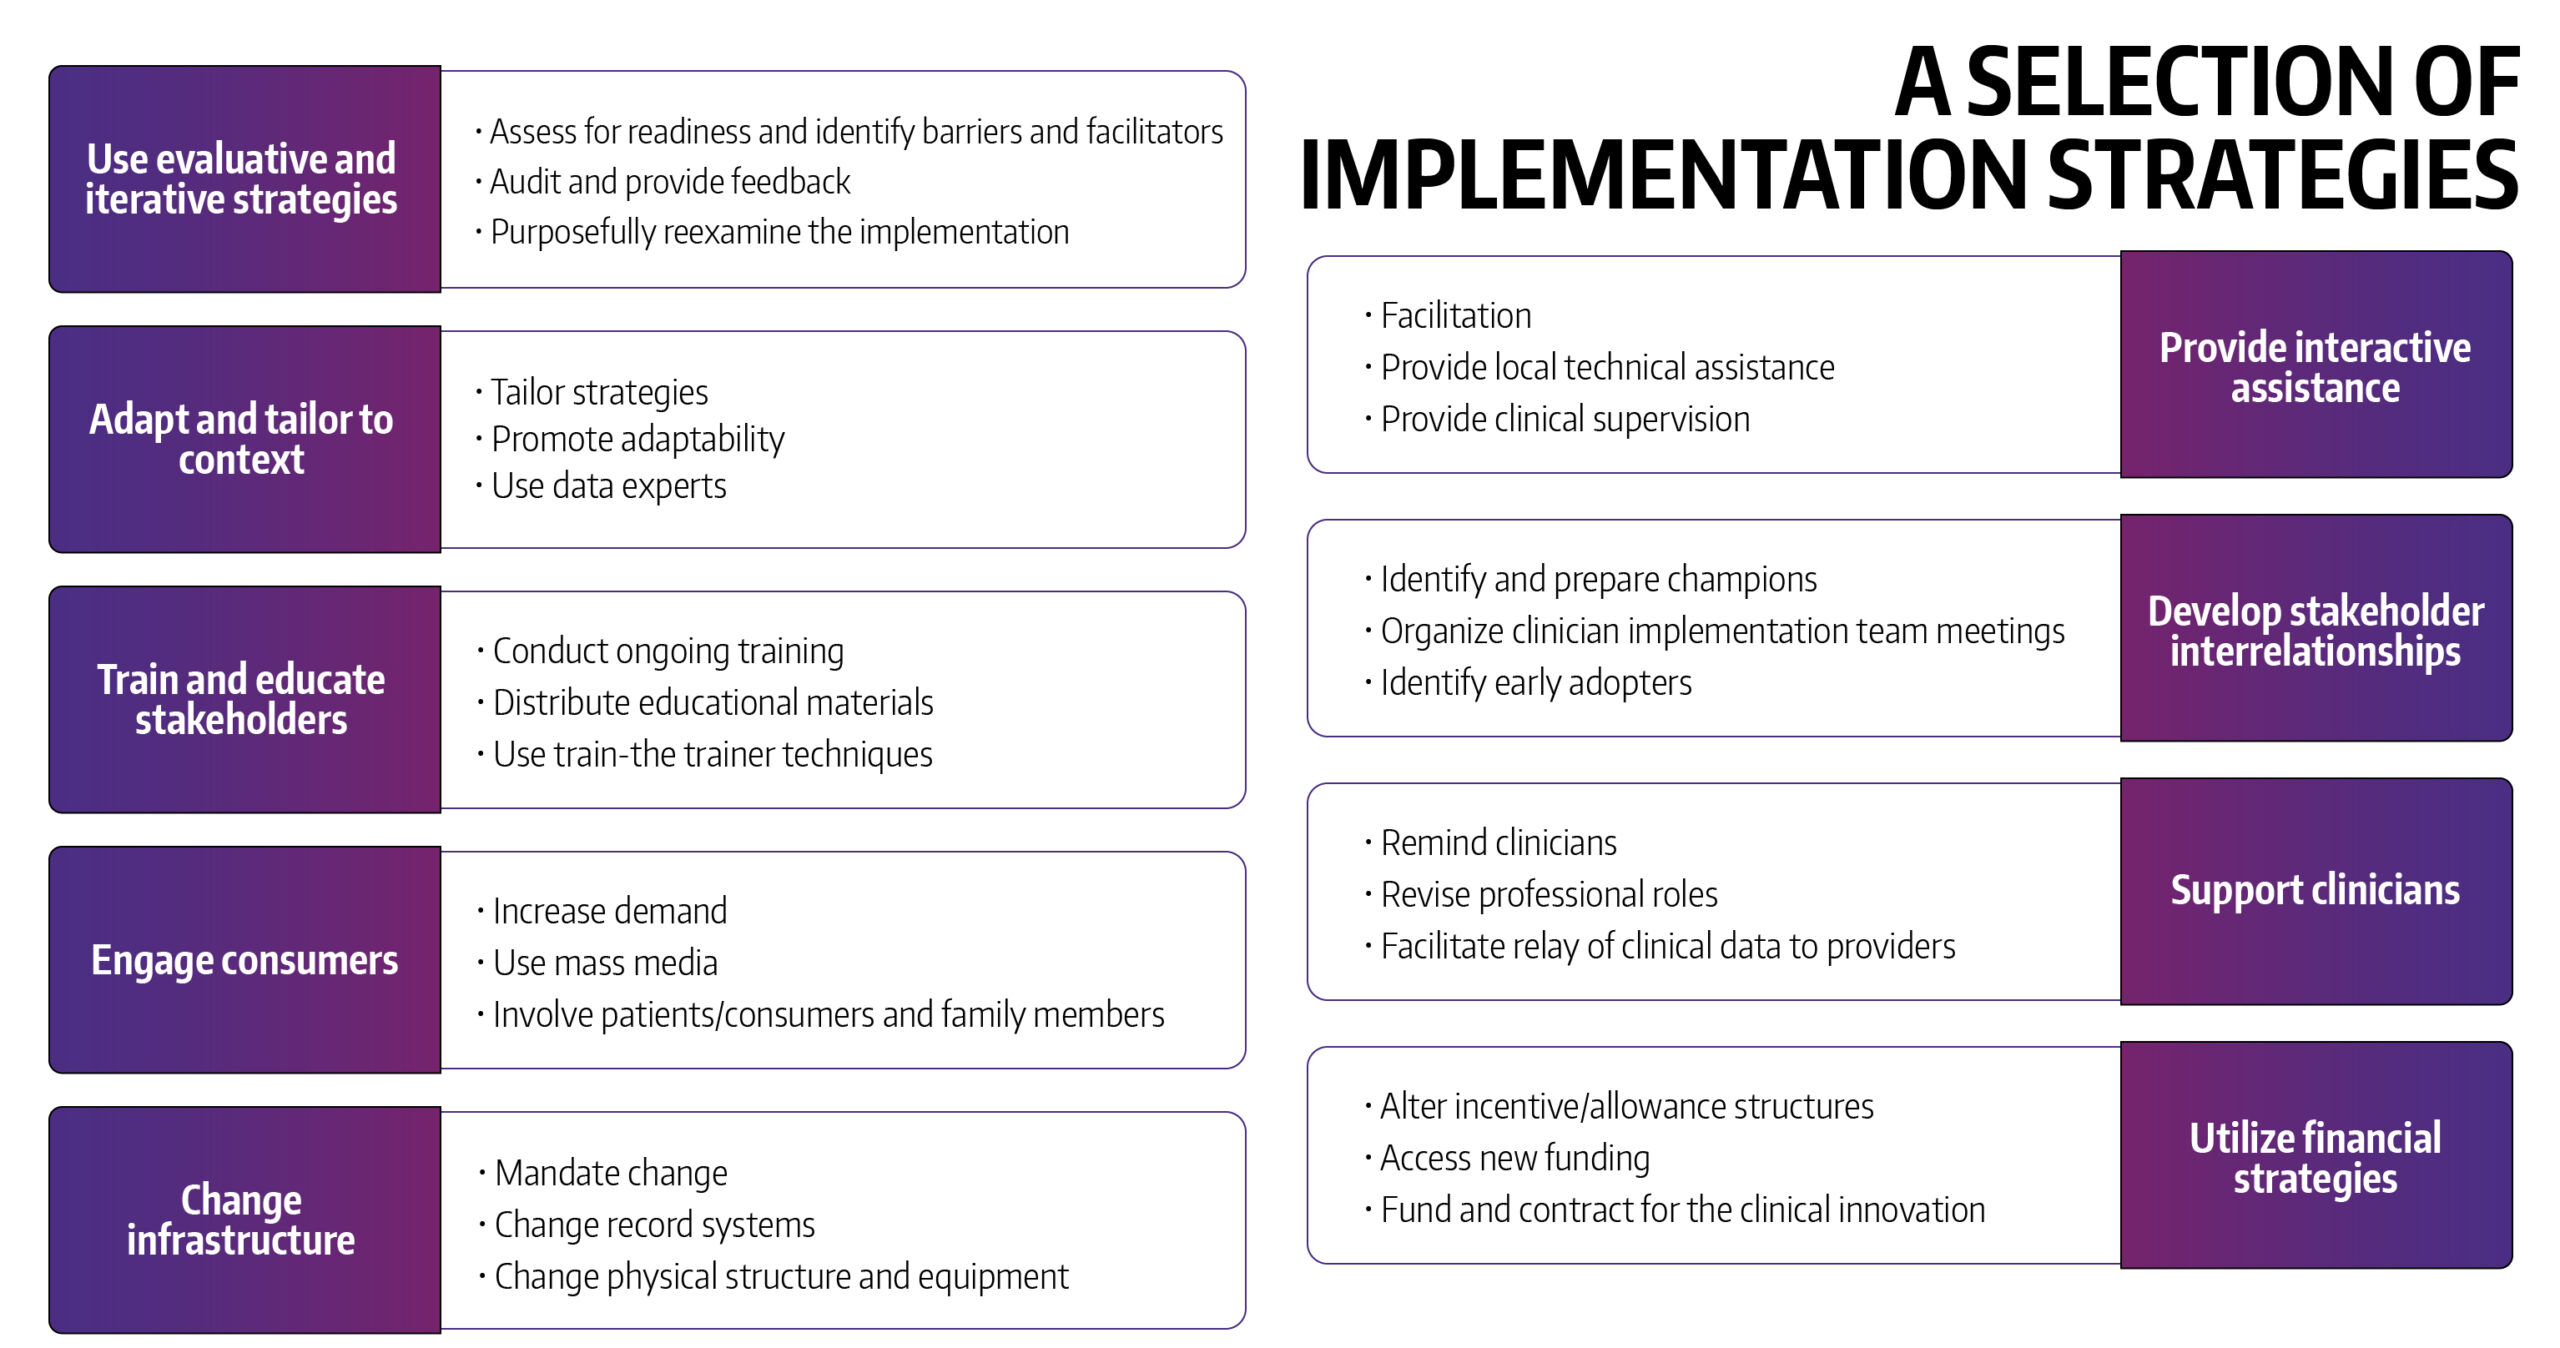 A chart titled: A SELECTION OF IMPLEMENTATION STRATEGIES. Nine strategy groups are presented, each group in its own bubble. Each bubble is labeled with the grouping using white text on a purple background, and each bubble also has three example strategies (bulleted black text on white background). Groupings are: 1. “Use evaluative and iterative strategies.” Examples: Assess for readiness and identify barriers and facilitators; Audit and provide feedback; Purposefully reexamine the implementation. 2. “Adapt and tailor to context.” Examples: Tailor strategies; Promote adaptability; Use data experts. 3. “Train and educate stakeholders.” Examples: Conduct ongoing training; Distribute educational materials; Use train-the-trainer techniques. 4. “Engage consumers.” Examples: Increase demand; Use mass media; Involve patients/consumers and family members. 5. “Change infrastructure.” Examples: Mandate change; Change record systems; Change physical structure and equipment. 6. “Provide interactive assistance.” Examples: Facilitation; Provide local technical assistance; Provide clinical supervision. 7. “Develop stakeholder interrelationships.” Examples: Identify and prepare champions; Organize clinician implementation team meetings; Identify early adopters. 8. “Support clinicians.” Examples: Remind clinicians; Revise professional roles; Facilitate relay of clinical data to providers. 9. “Utilize financial strategies.” Examples: Alter incentive/allowance structures; Access new funding; Fund and contract for the clinical innovation.